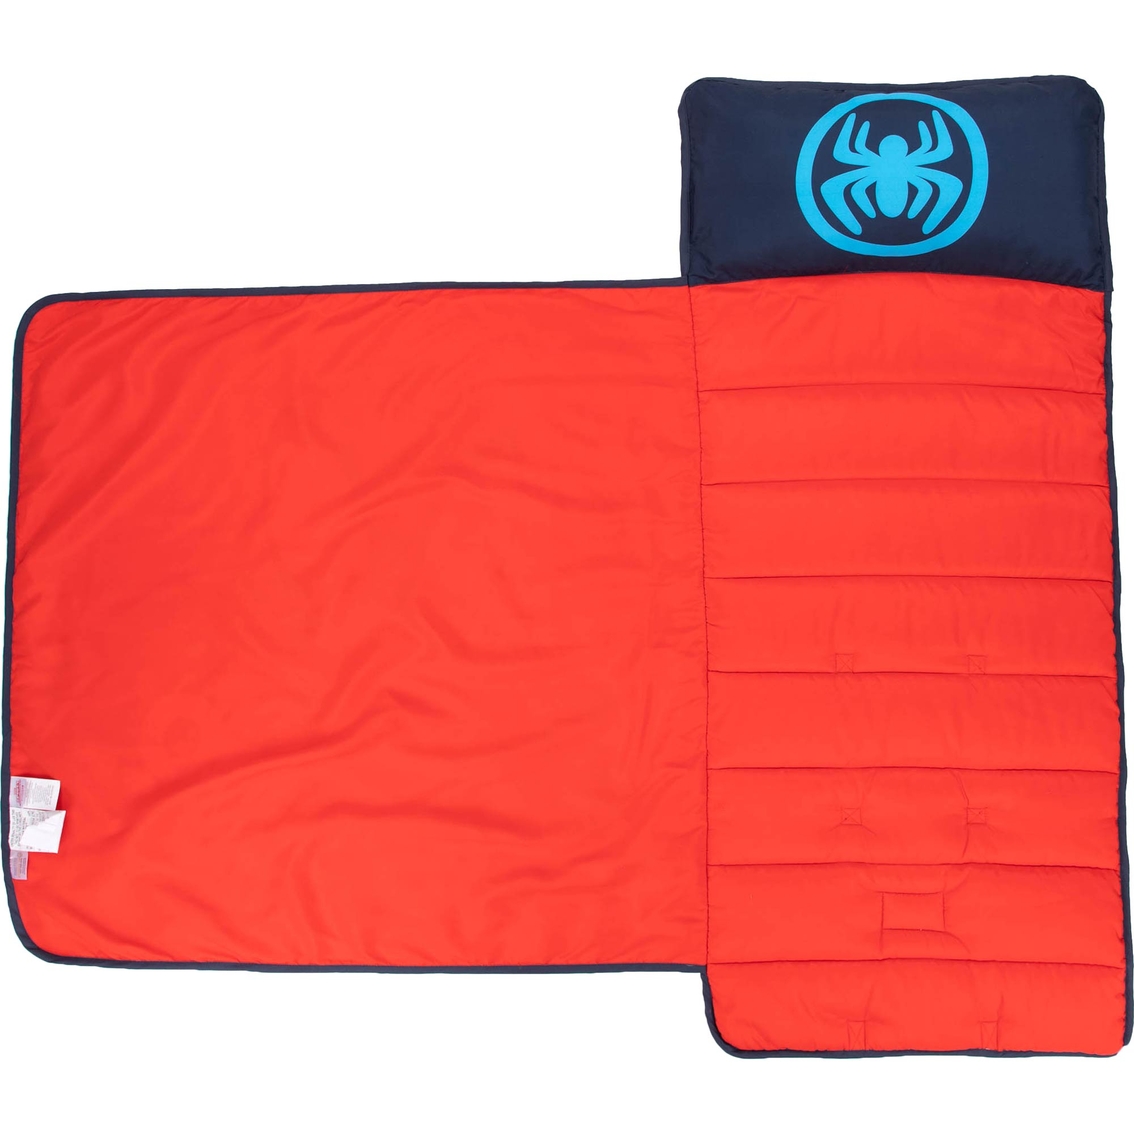 Marvel Spidey and Friends 20 x 46 in. Nap Mat - Image 6 of 7